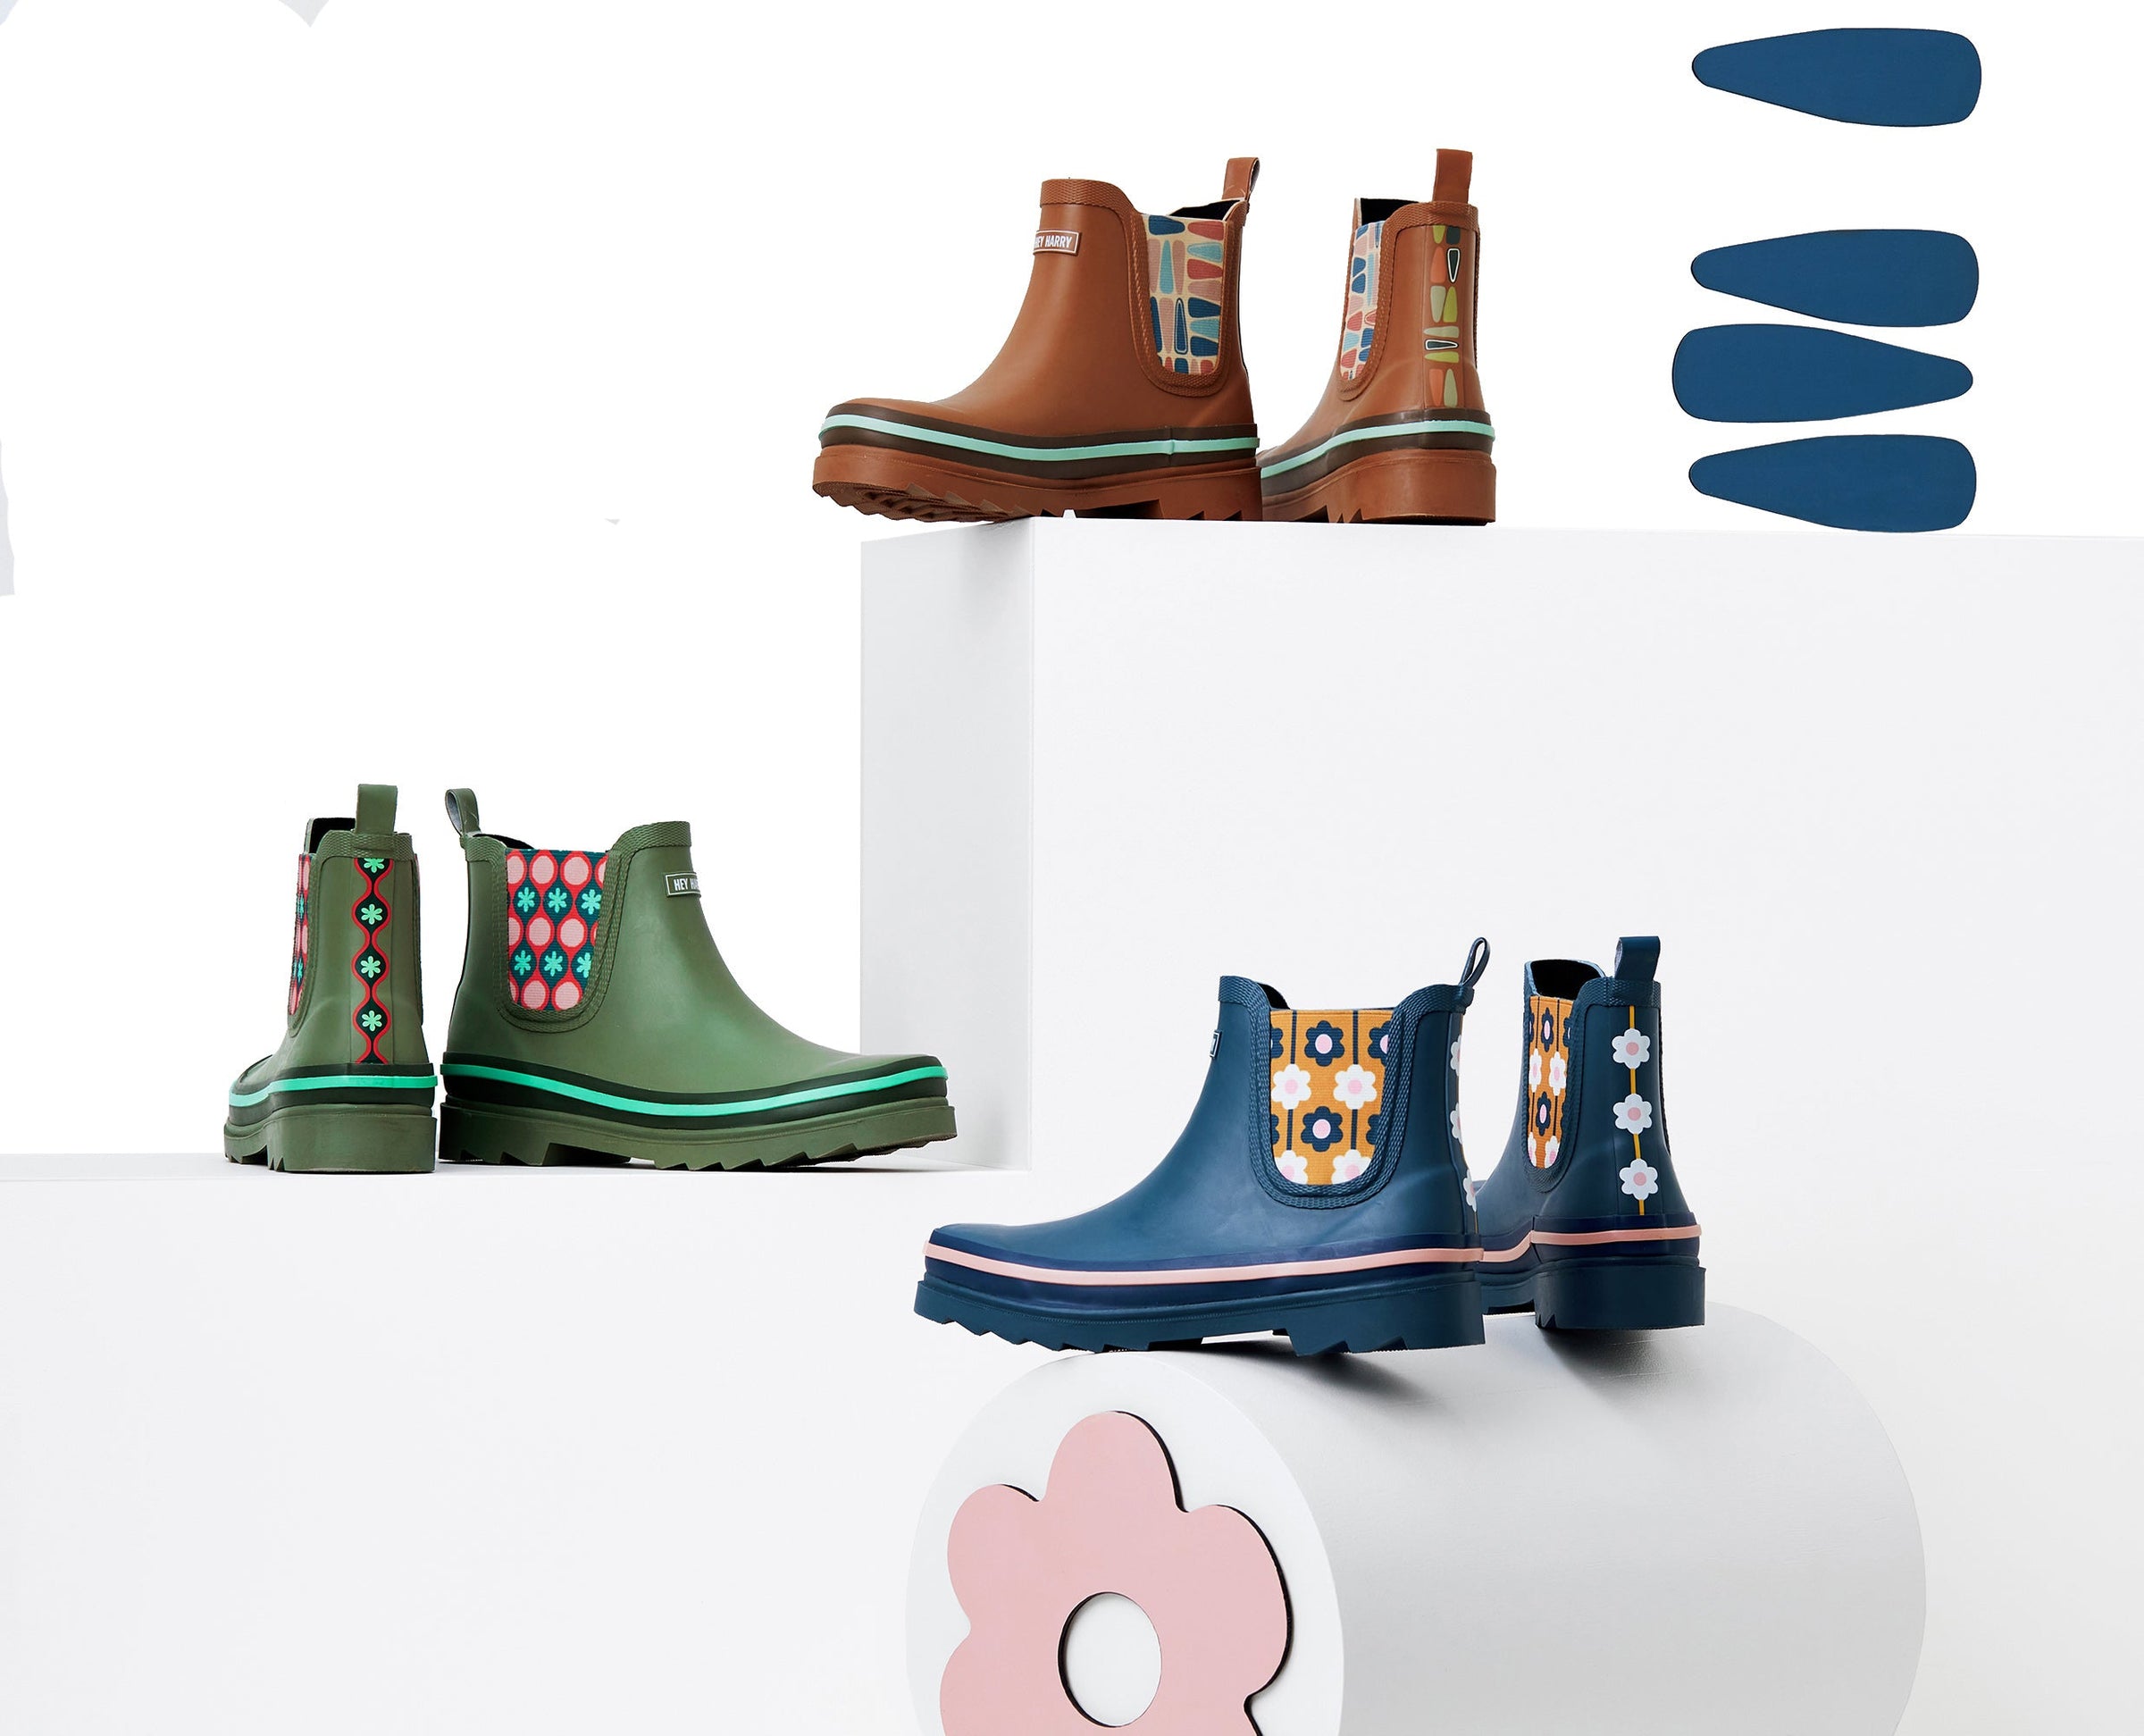 Three colourful gumboot designs by Hey Harry